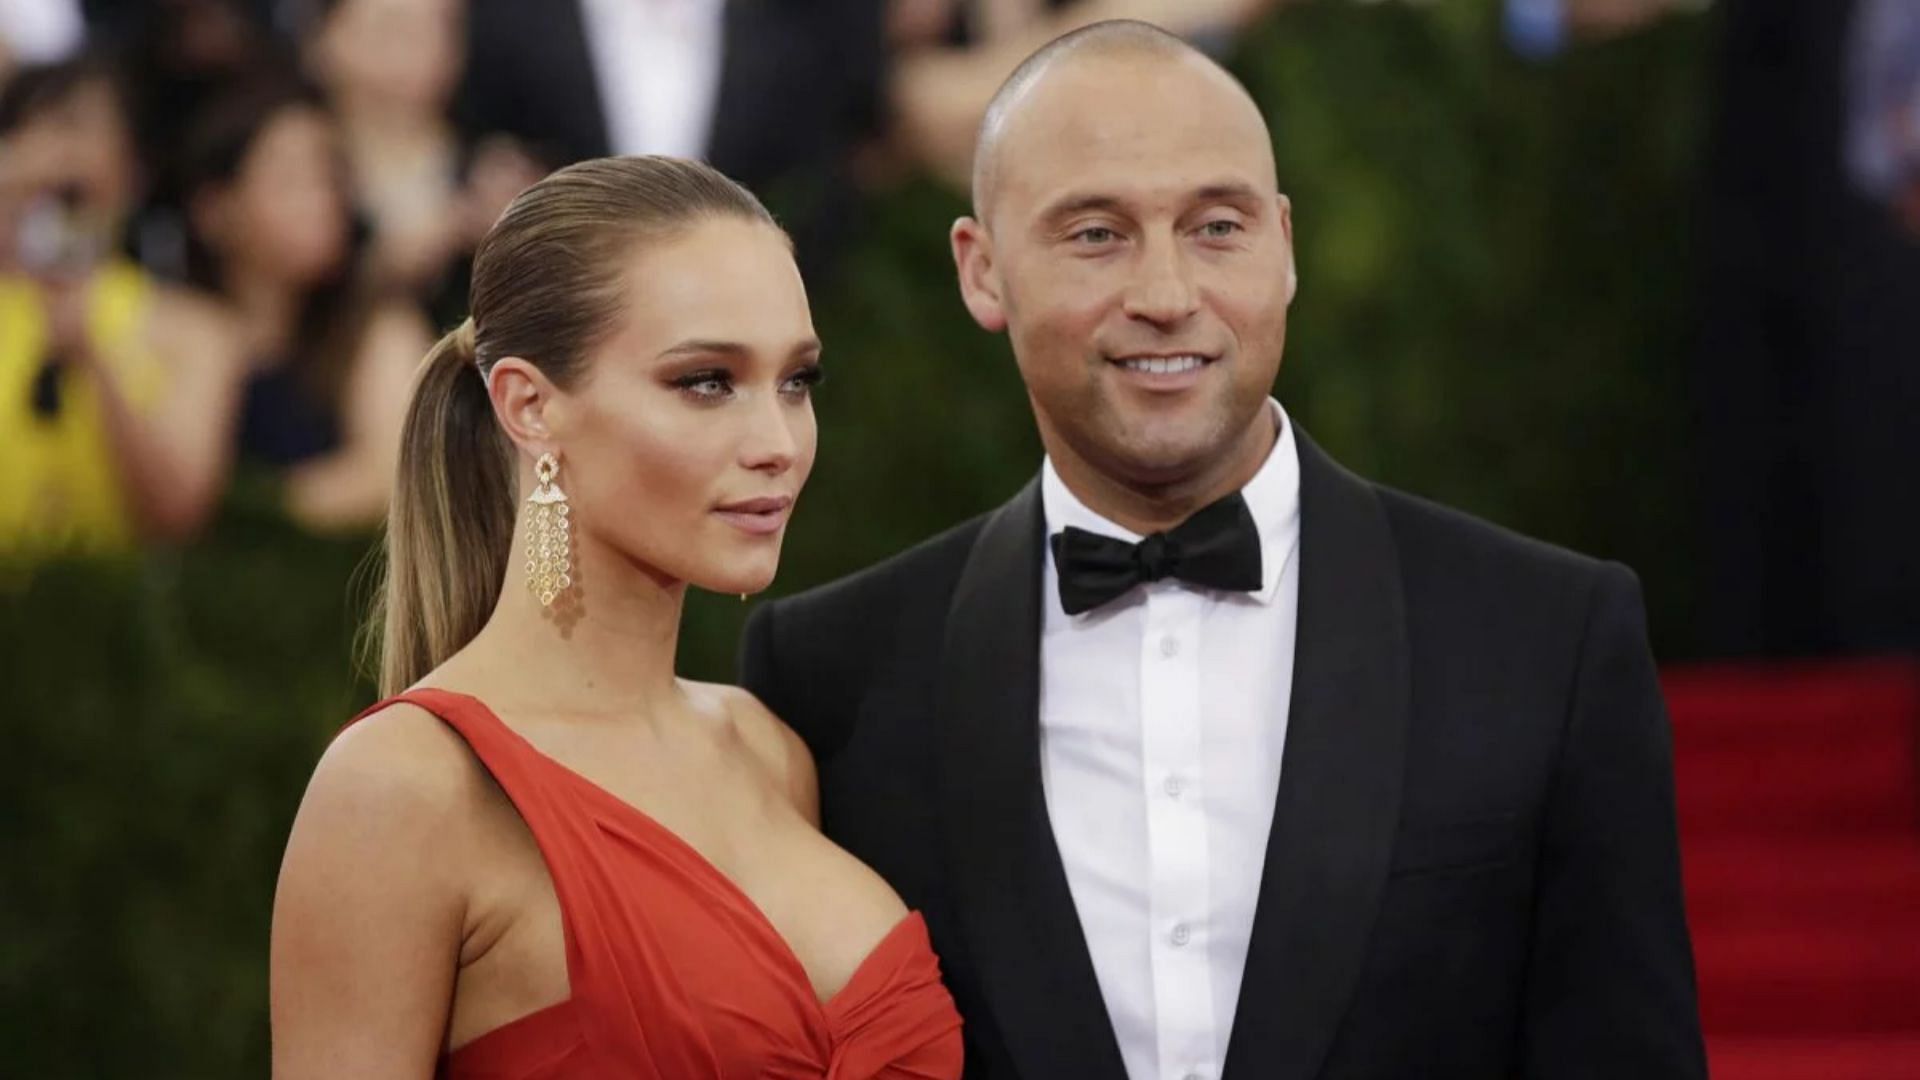 You got this babe - Hannah Jeter shares an adorable childhood picture of Derek  Jeter on her Instagram after the New York Yankees legend makes his  much-awaited social media debut